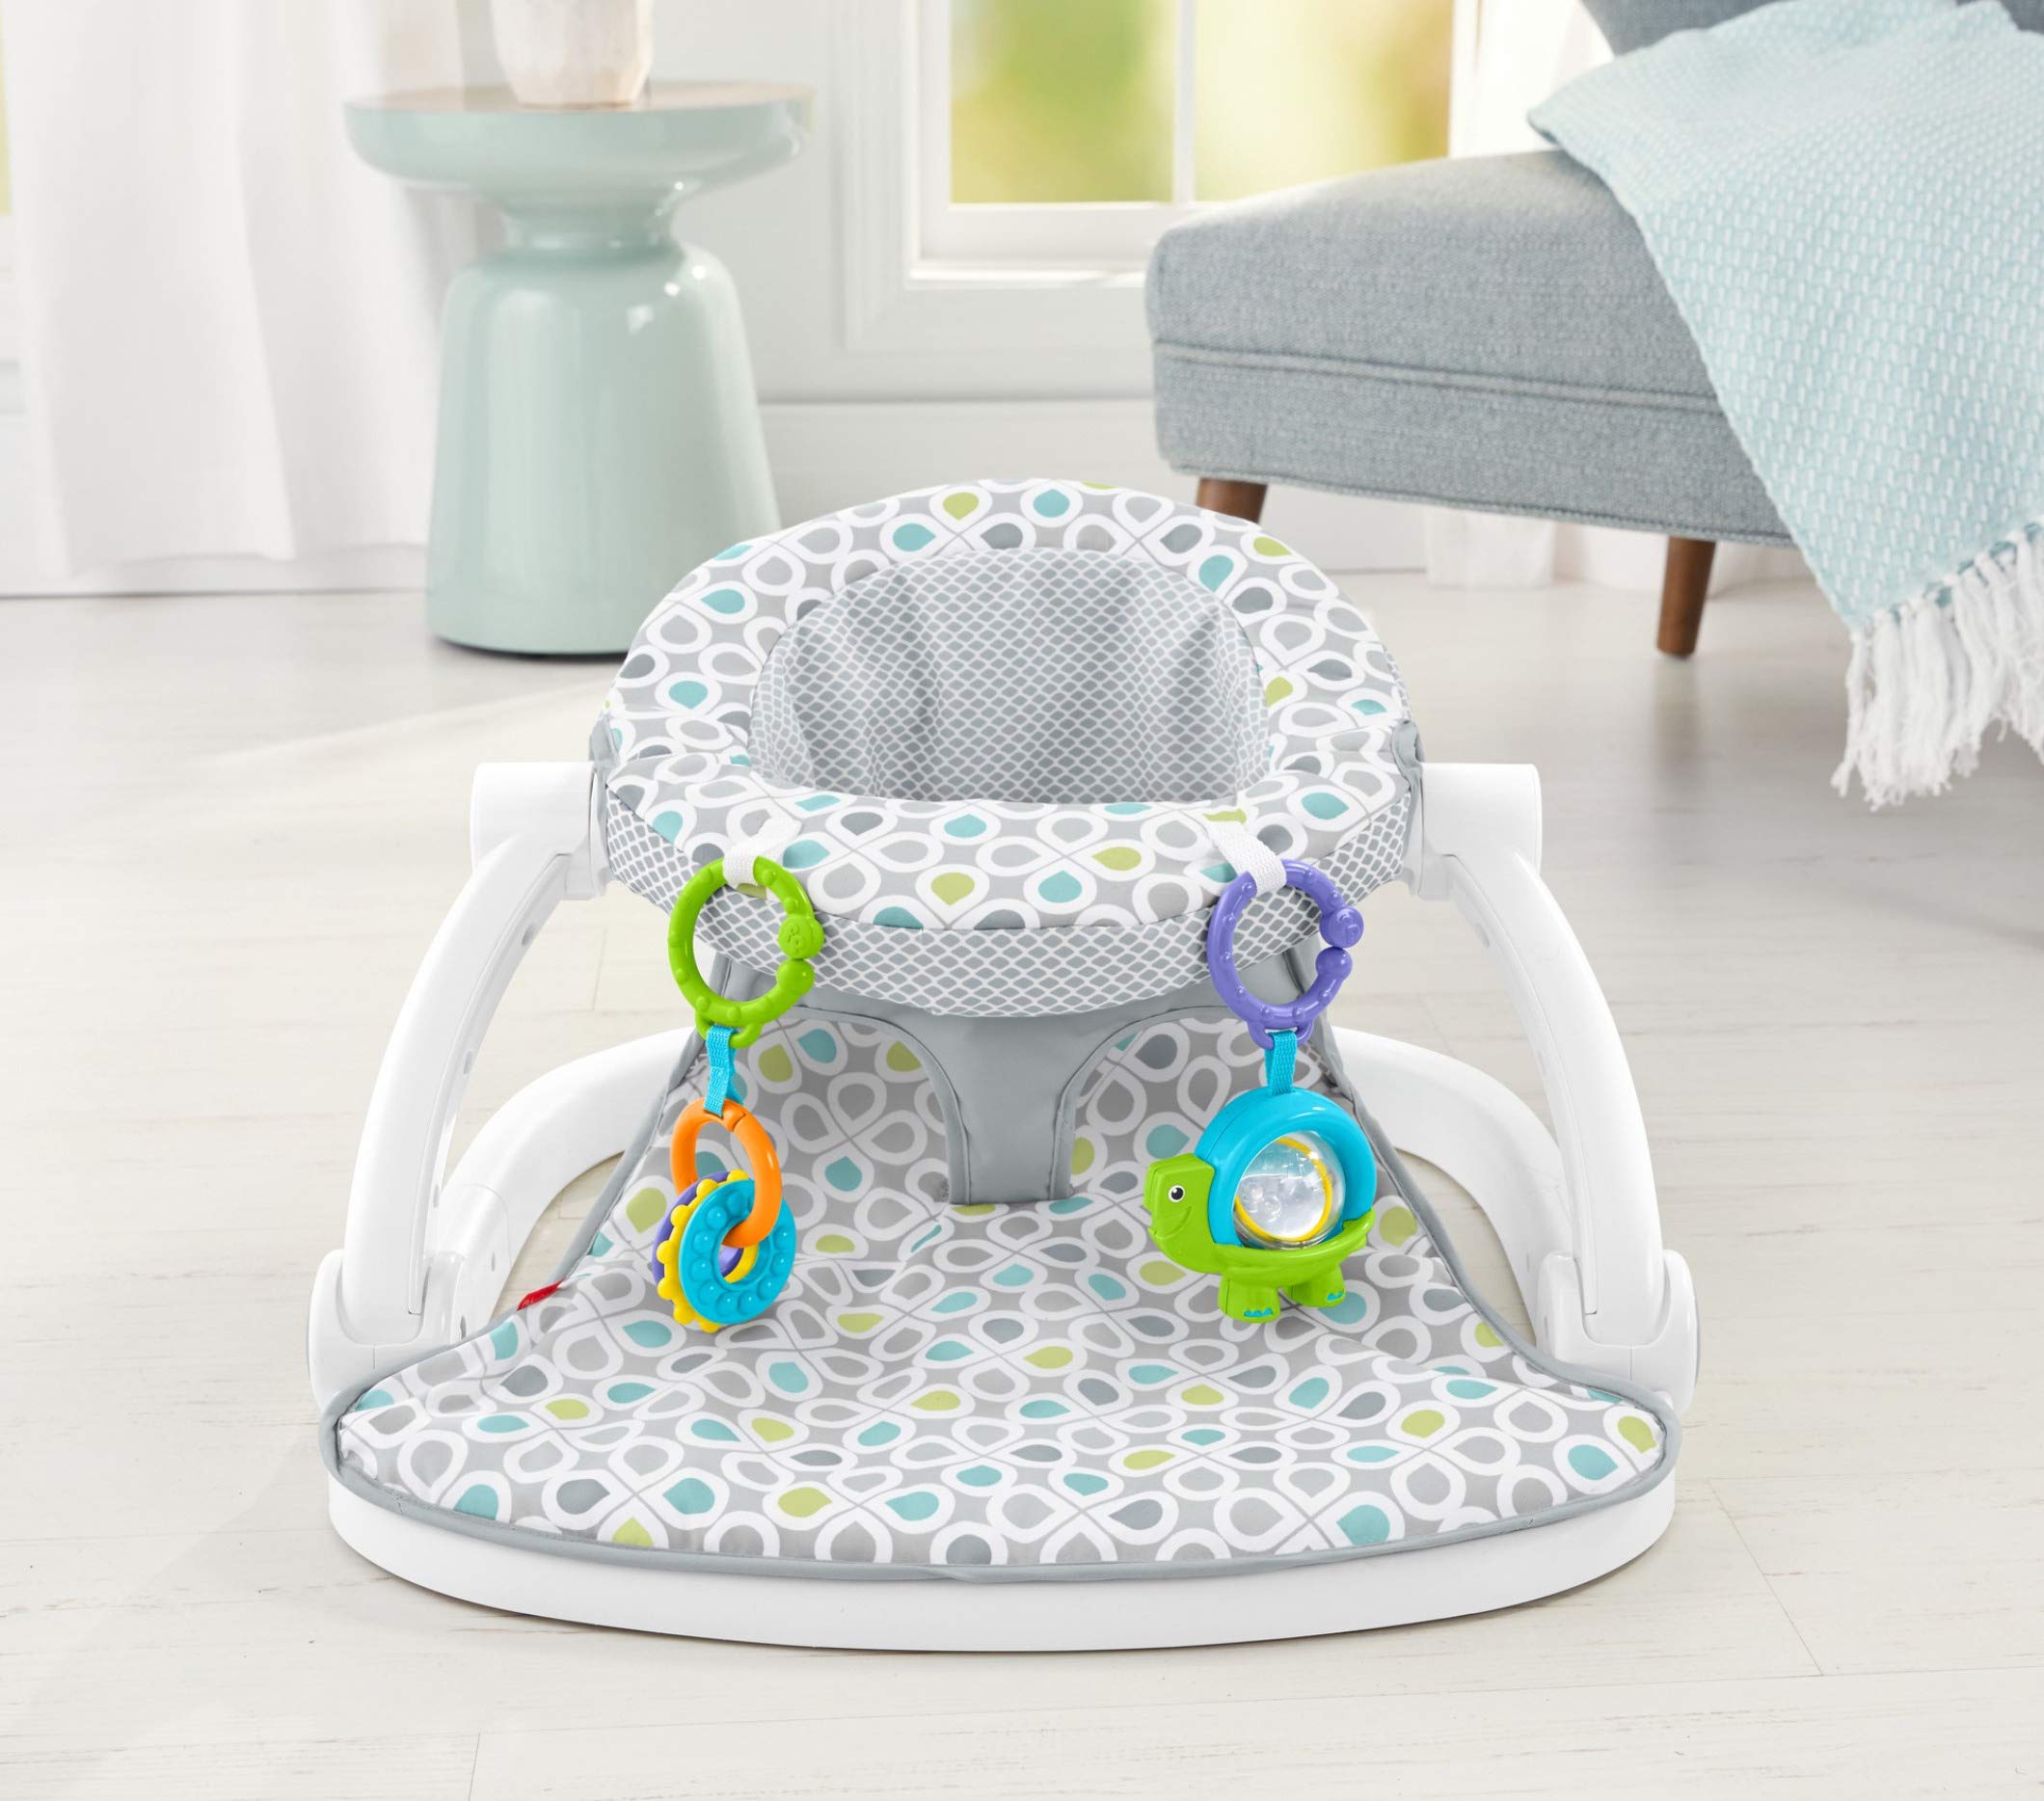 Fisher-Price Portable Baby Chair Sit-Me-Up Floor Seat With Developmental Toys & Machine Washable Seat Pad, Honeydew Drop